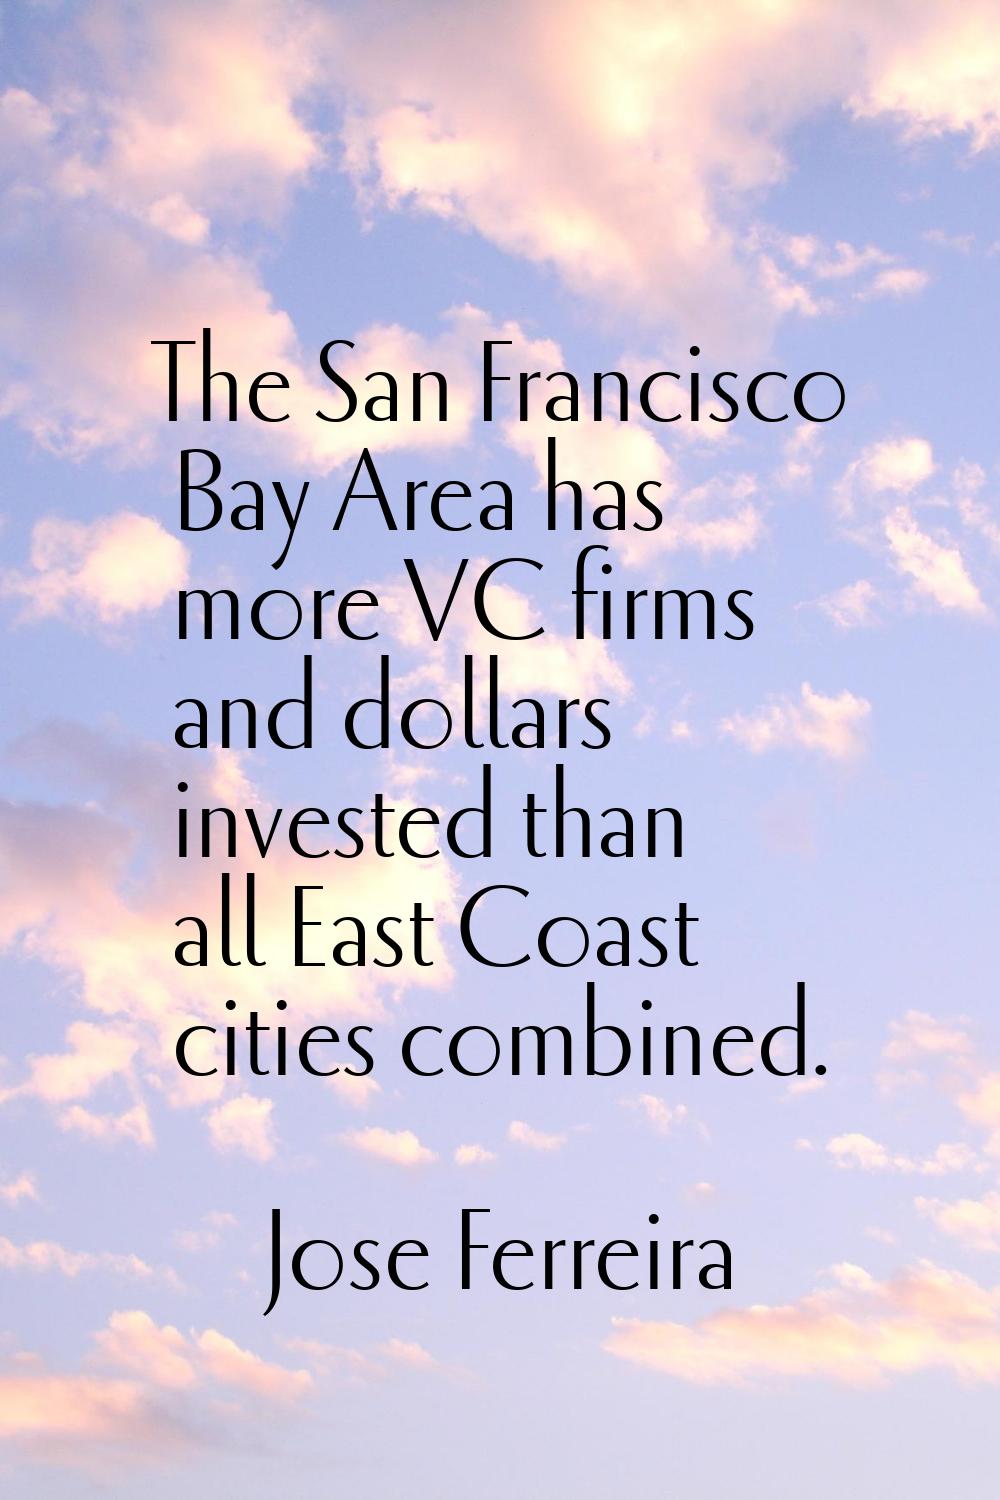 The San Francisco Bay Area has more VC firms and dollars invested than all East Coast cities combin